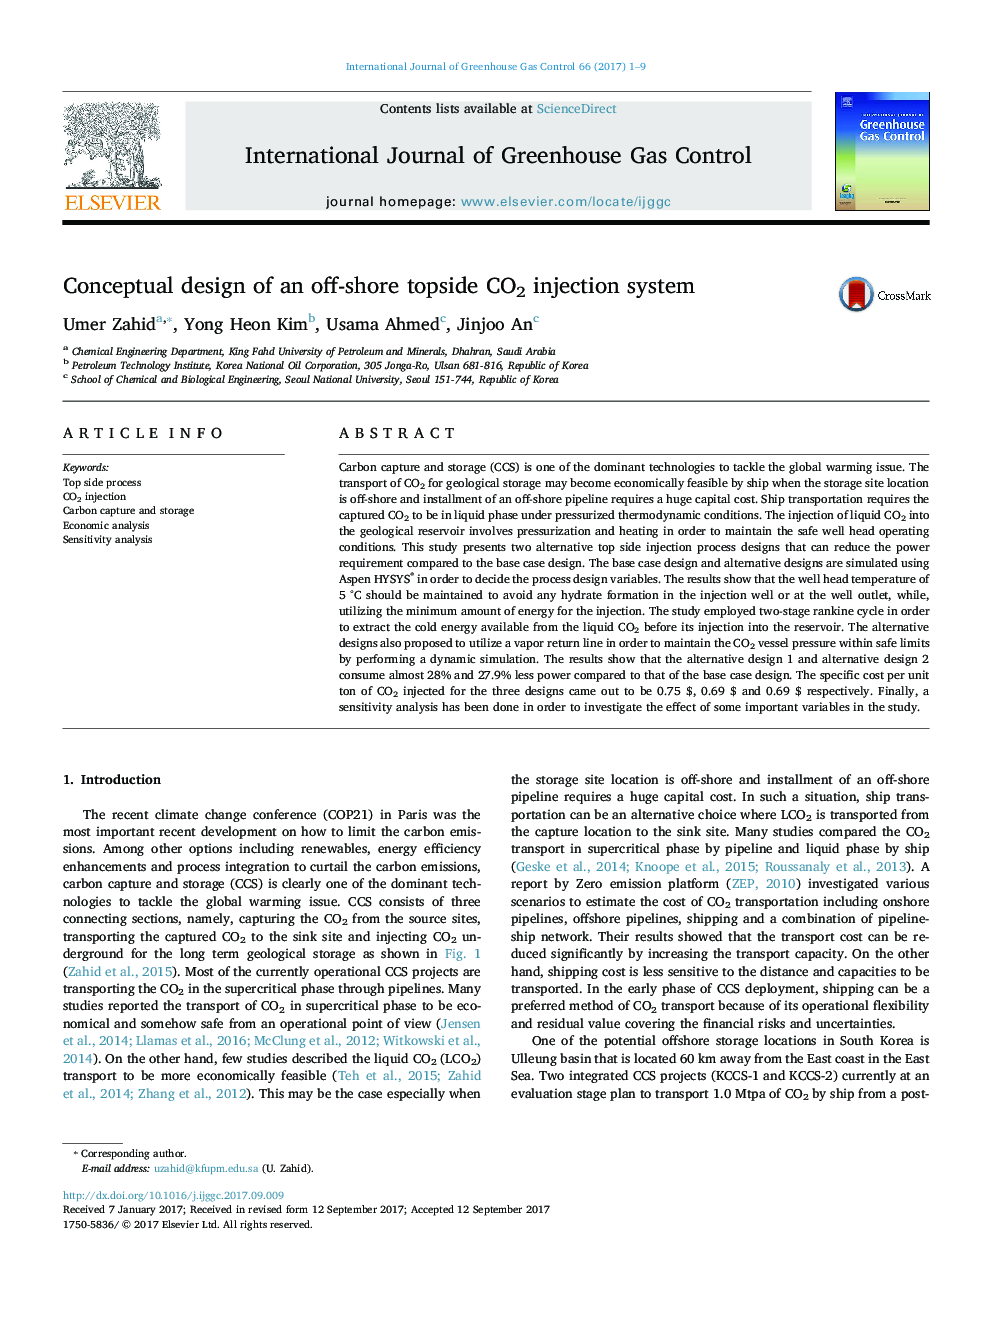 Conceptual design of an off-shore topside CO2 injection system